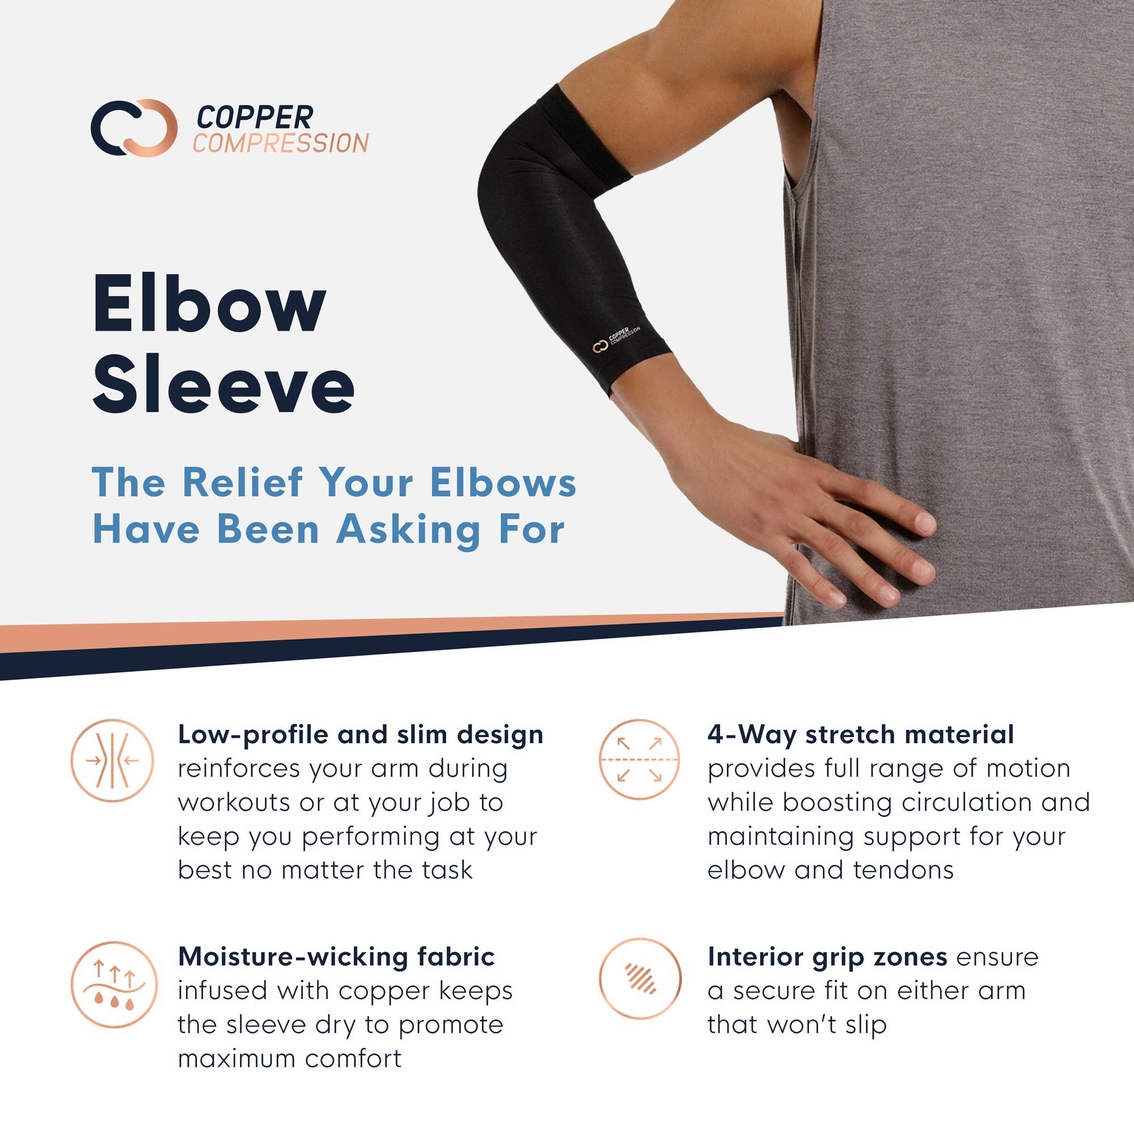 Copper Compression Elbow Sleeve - Image 2 of 4